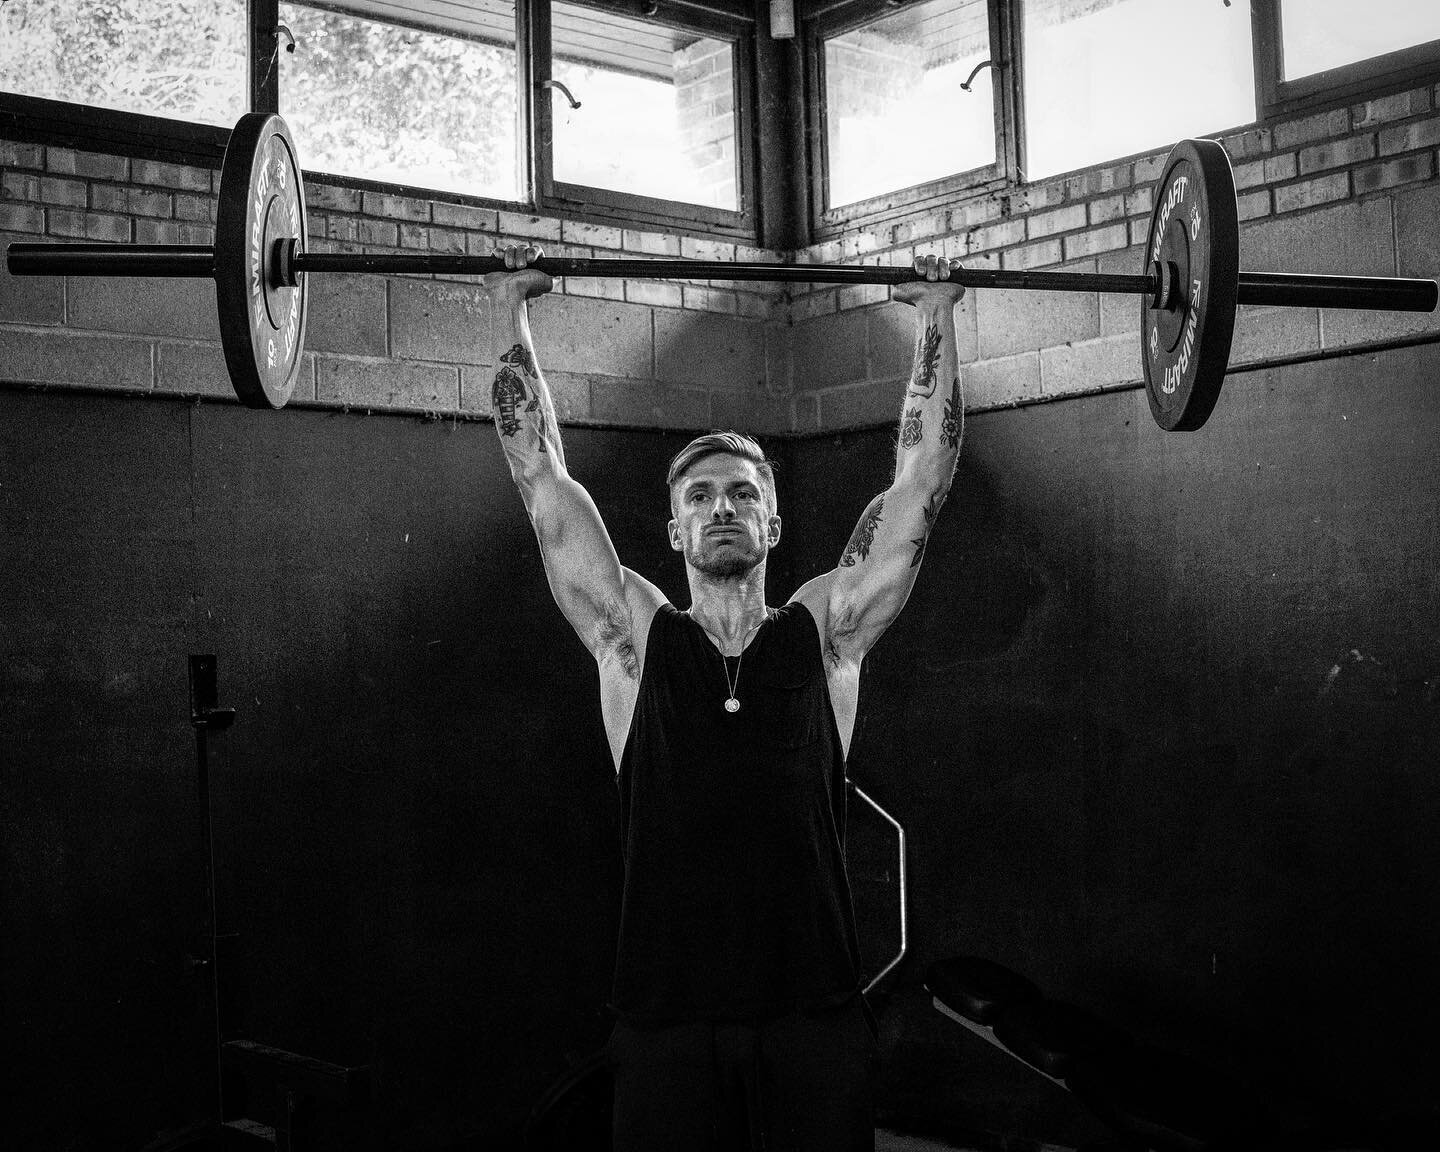 ⚠️OVERTRAINING ⚠️ - Many men don&rsquo;t realise the impact their training regime has on their hormones. 

Up to a certain point Testosterone and Growth Hormone will increase dramatically as a result of (resistance) training.

HOWEVER as training fre